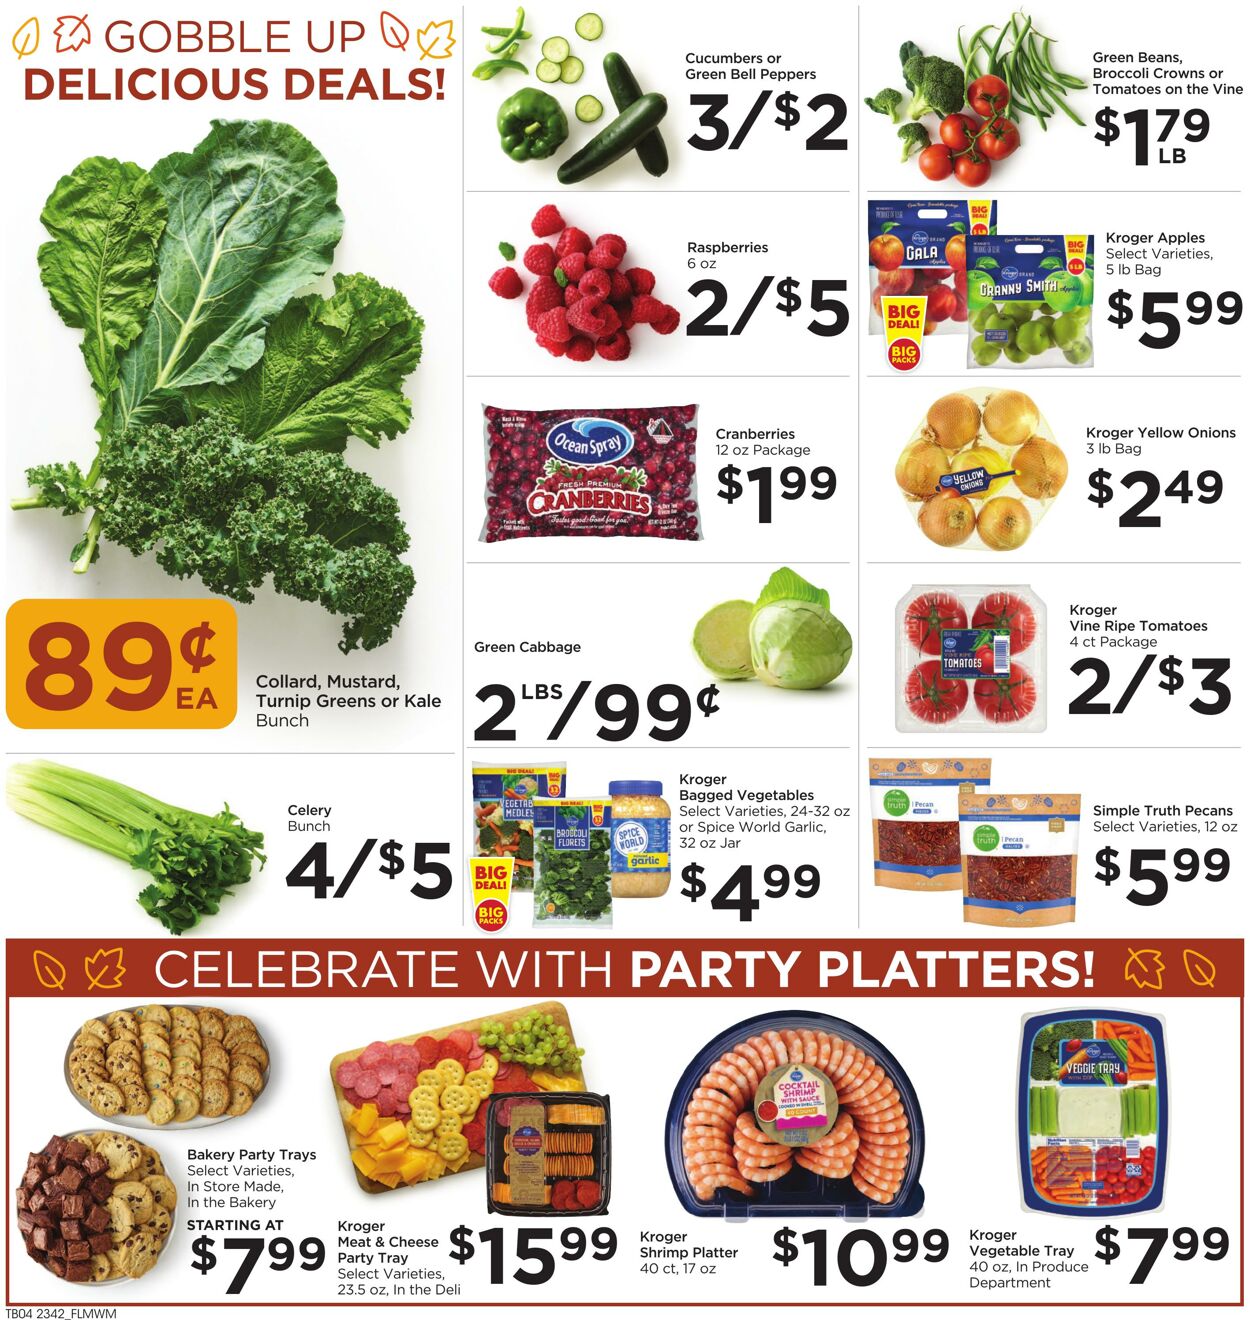 Catalogue Food 4 Less from 11/15/2023